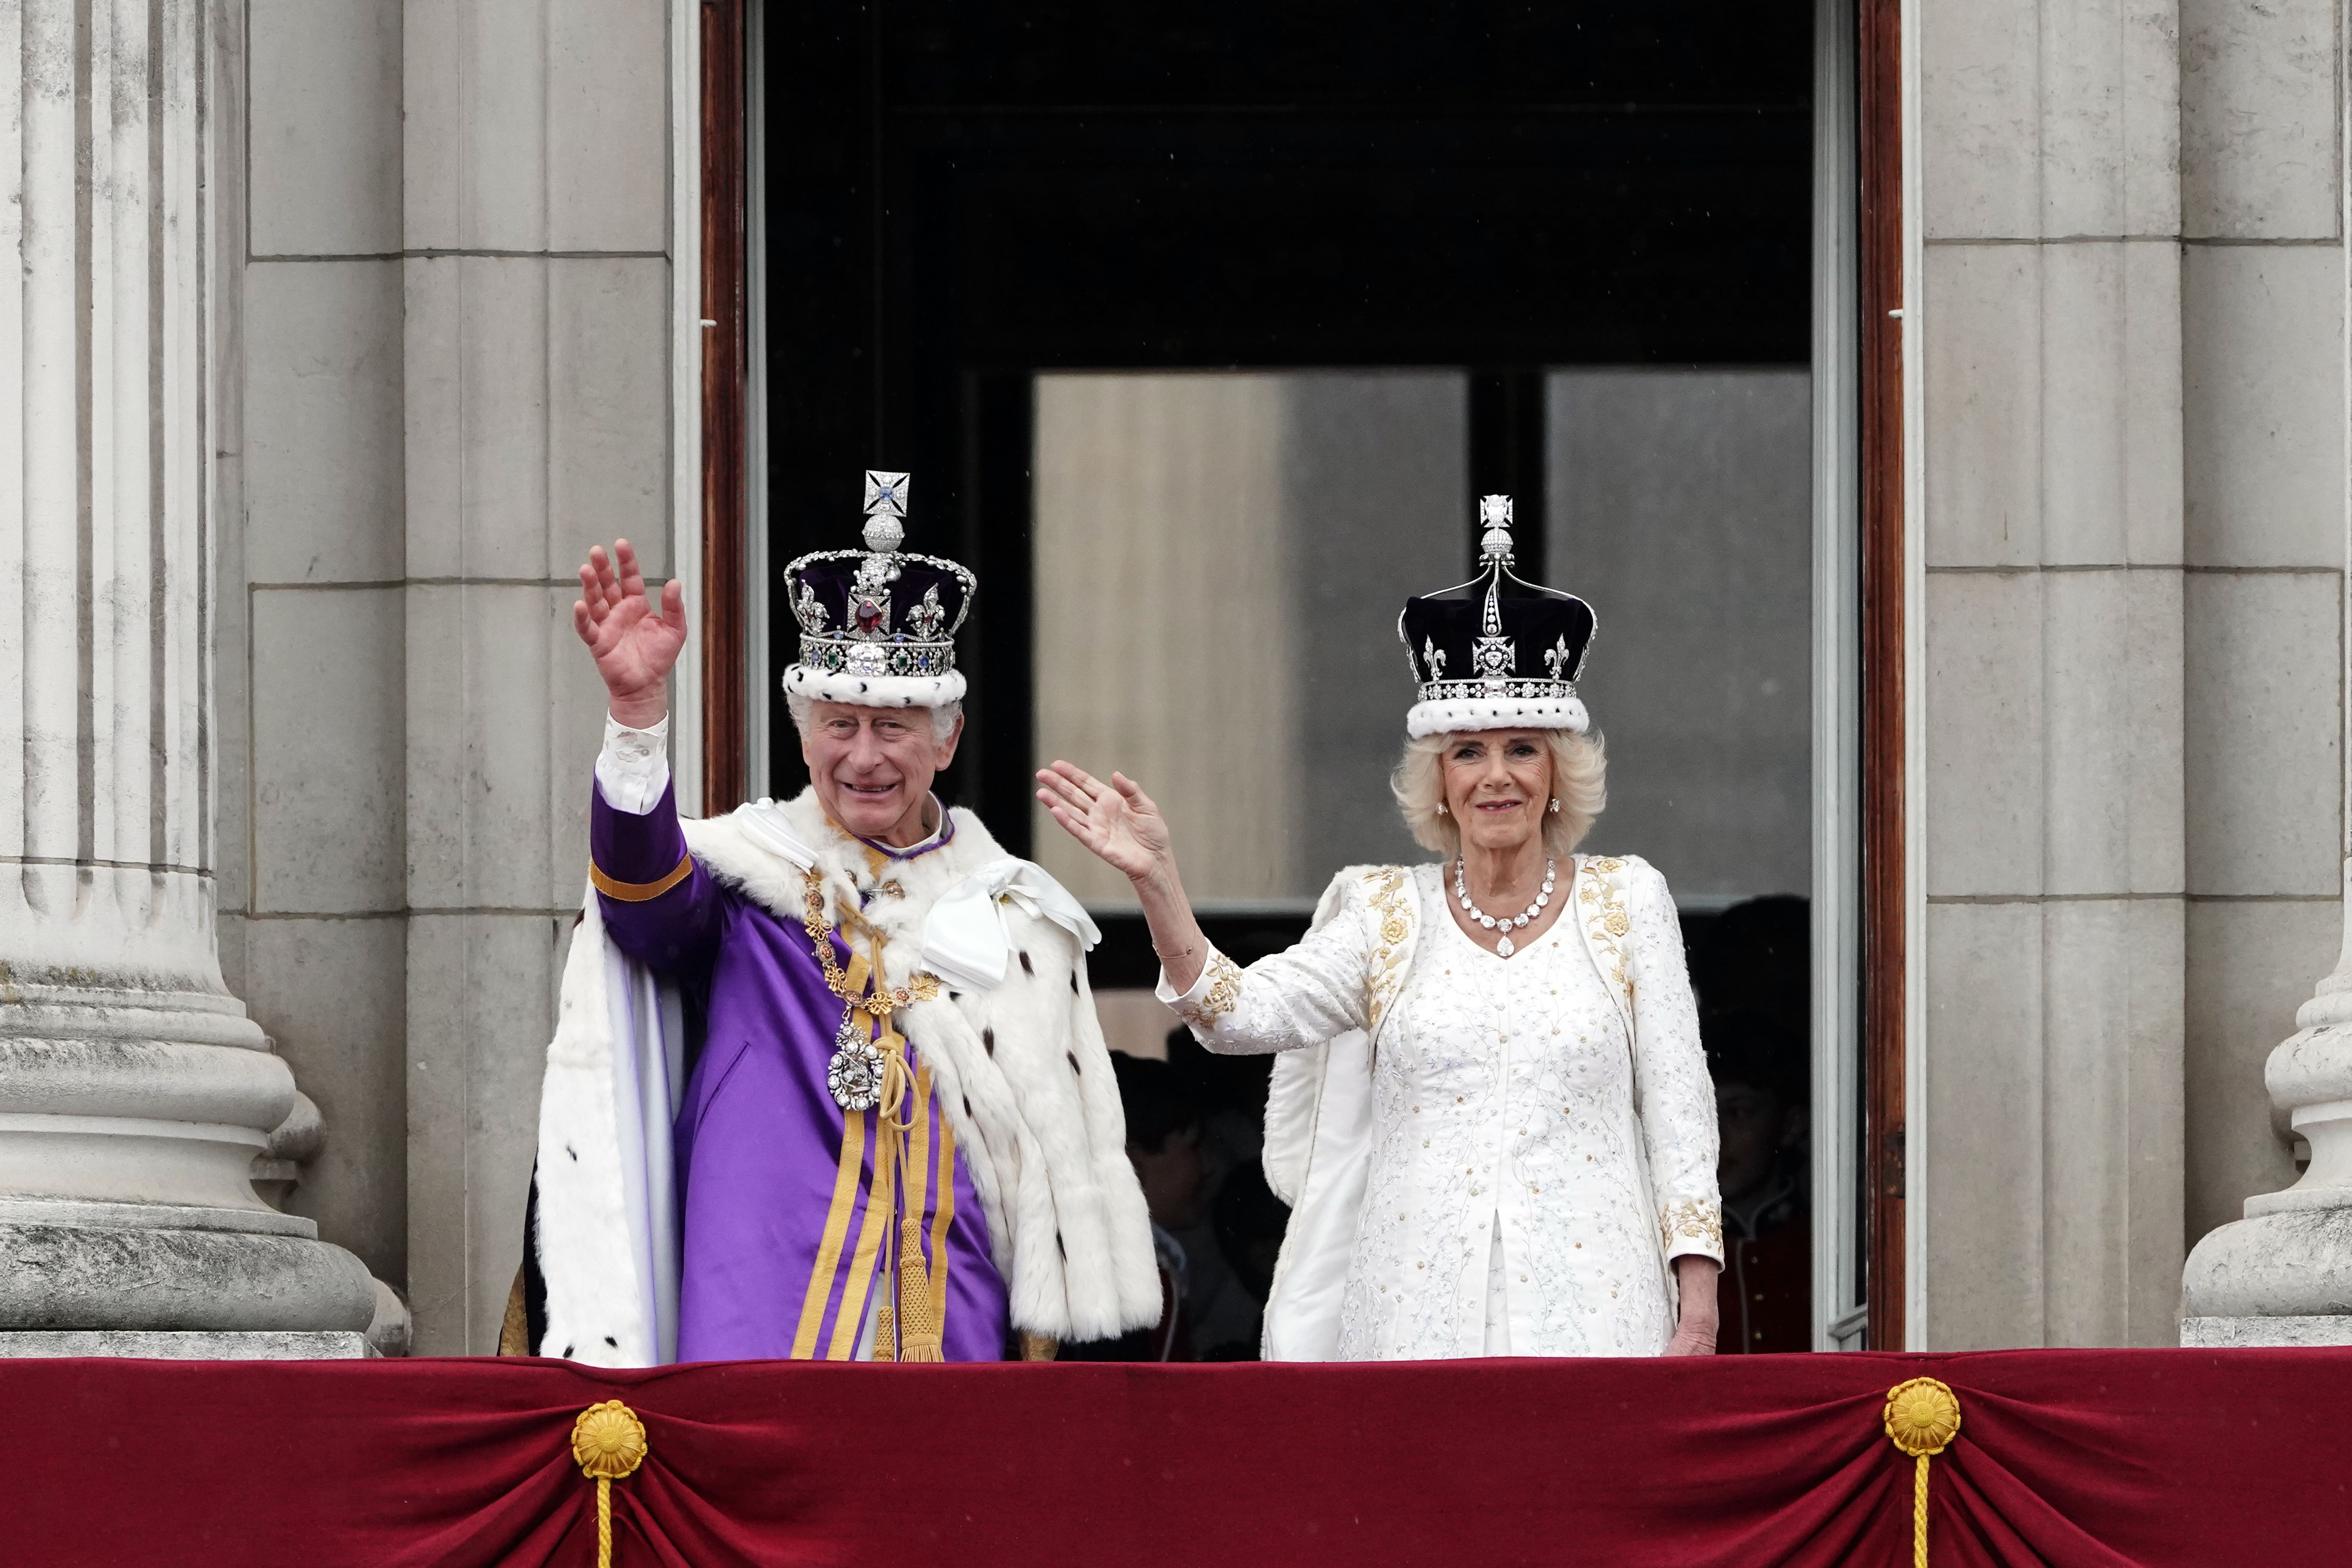 The King and Queen at the coronation this weekend